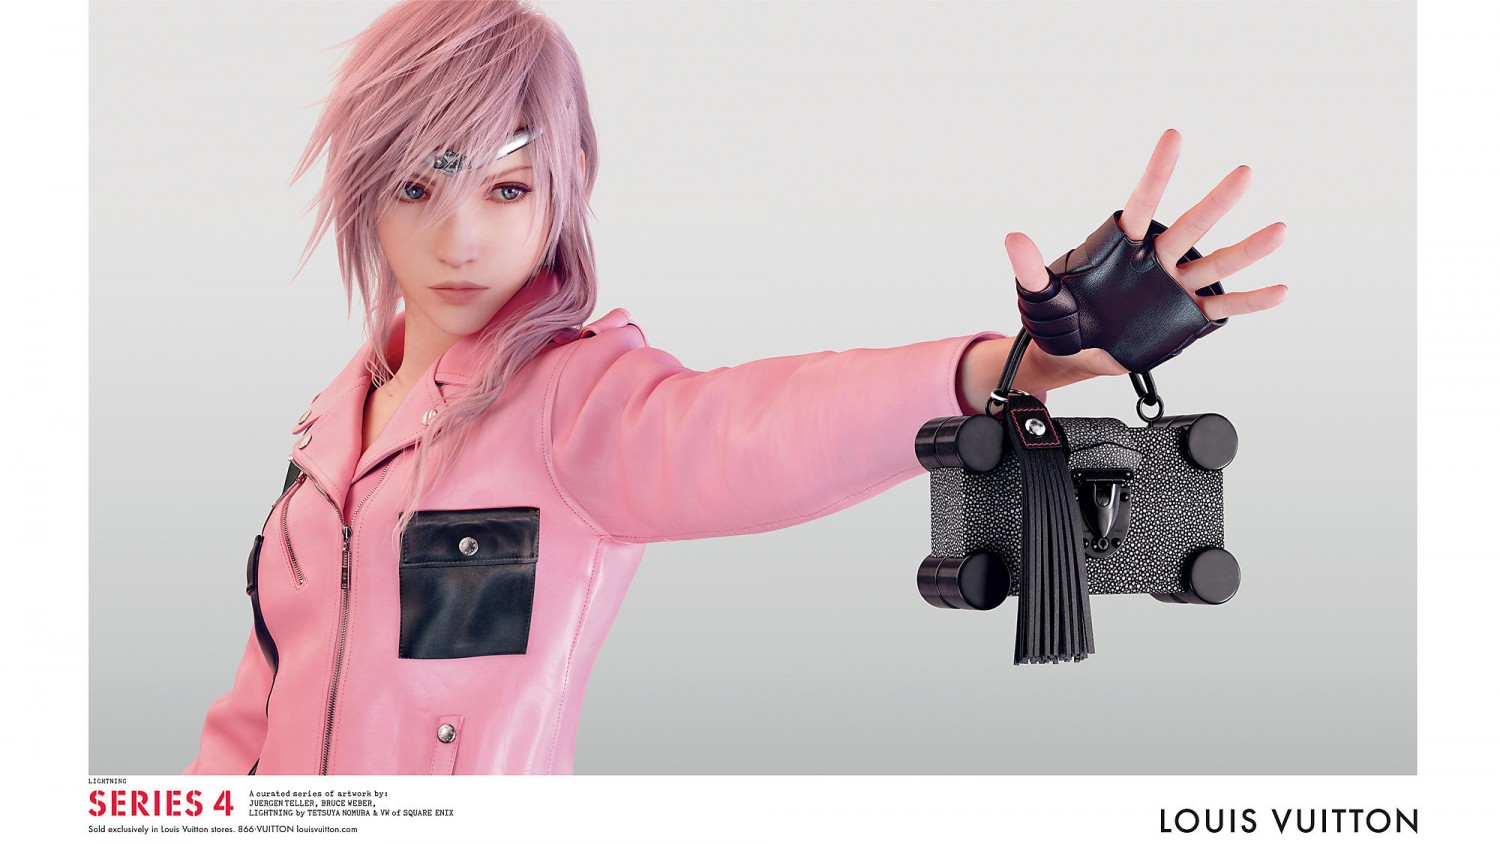 Lightning Strikes! Final Fantasy XIII Character is New Model for Louis Vuitton!